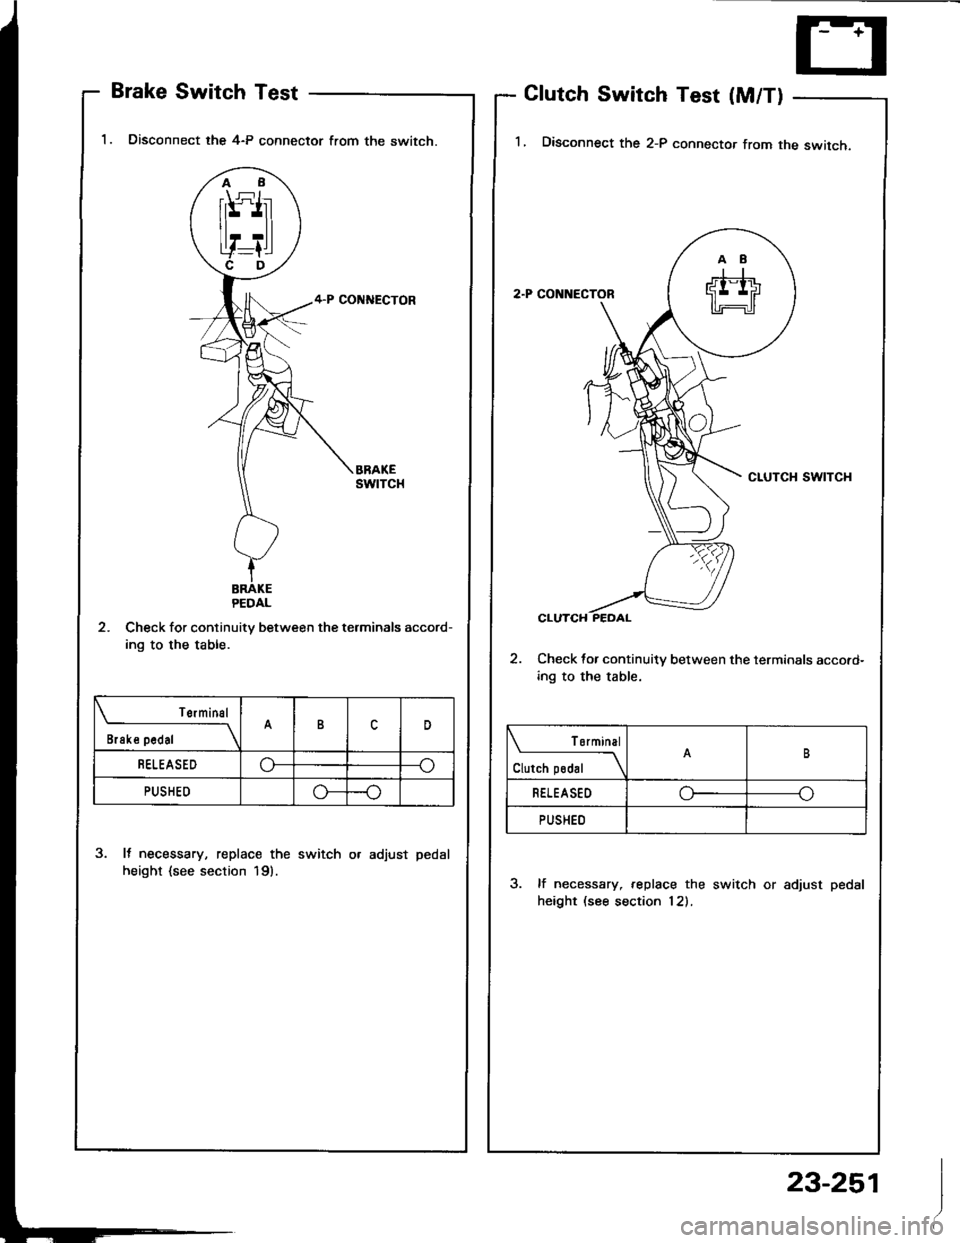 ACURA INTEGRA 1994  Service Service Manual Brake Switch Test
1. Disconnect the 4-P connector from the switch.
2. Check for continuitv between the terminals accord-
ing to the table.
3. It necessary, replace the switch or adjust pedal
height {